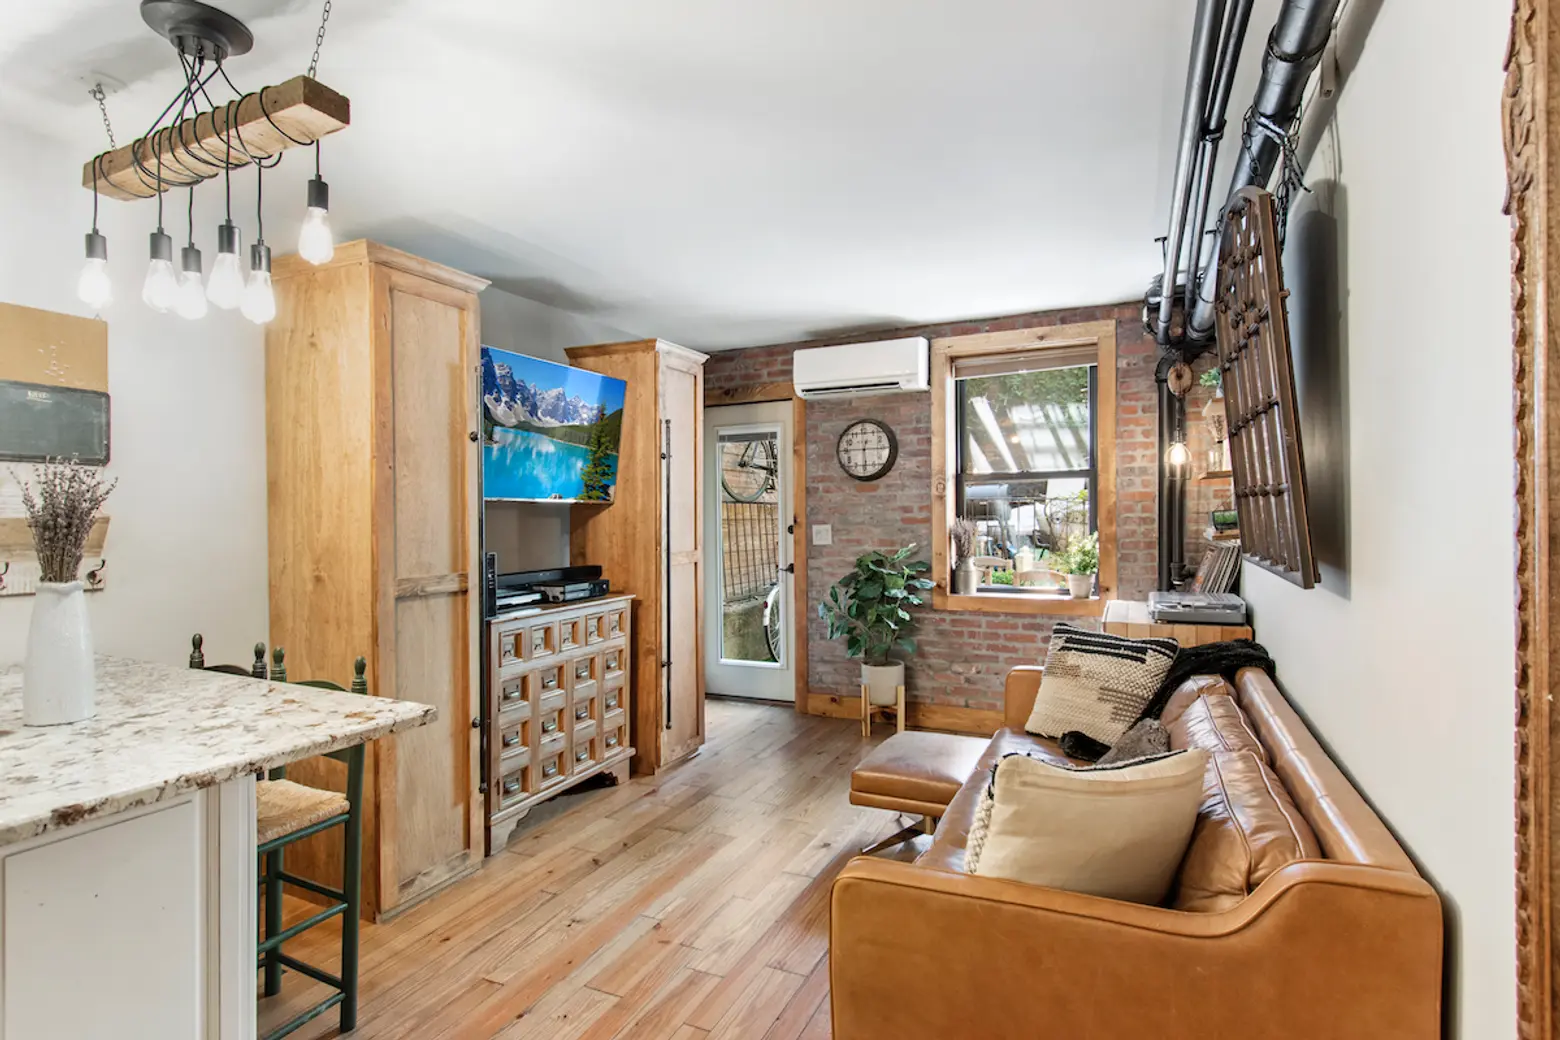 This cozy, quirky $425K Upper East Side studio has an astroturf-clad dream of a backyard